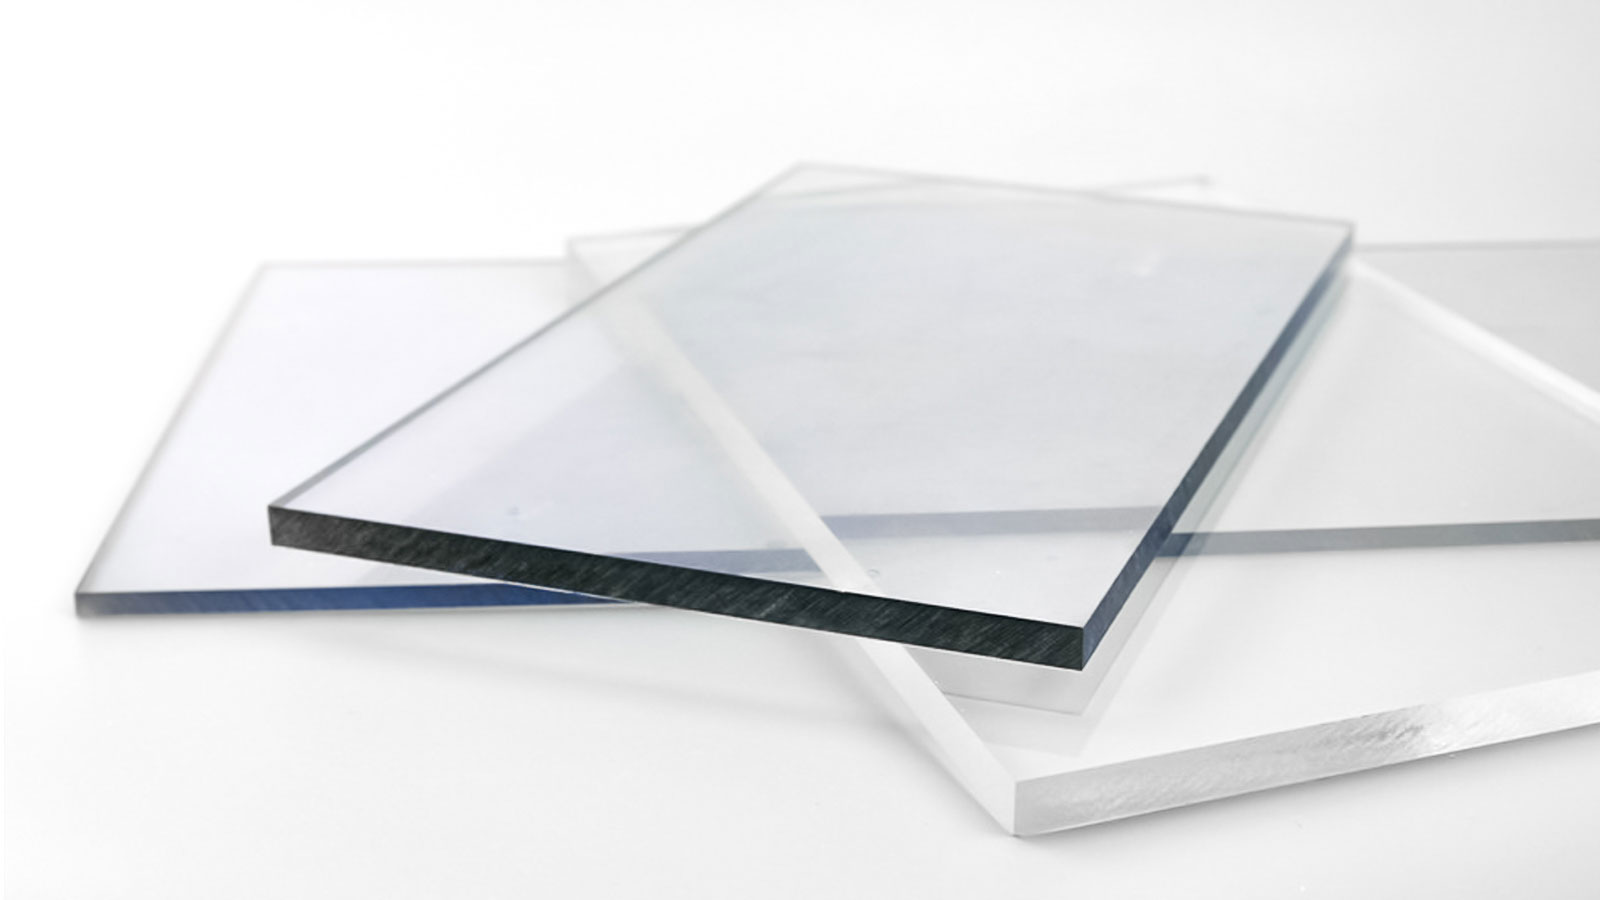 Working with Polycarbonate Sheets